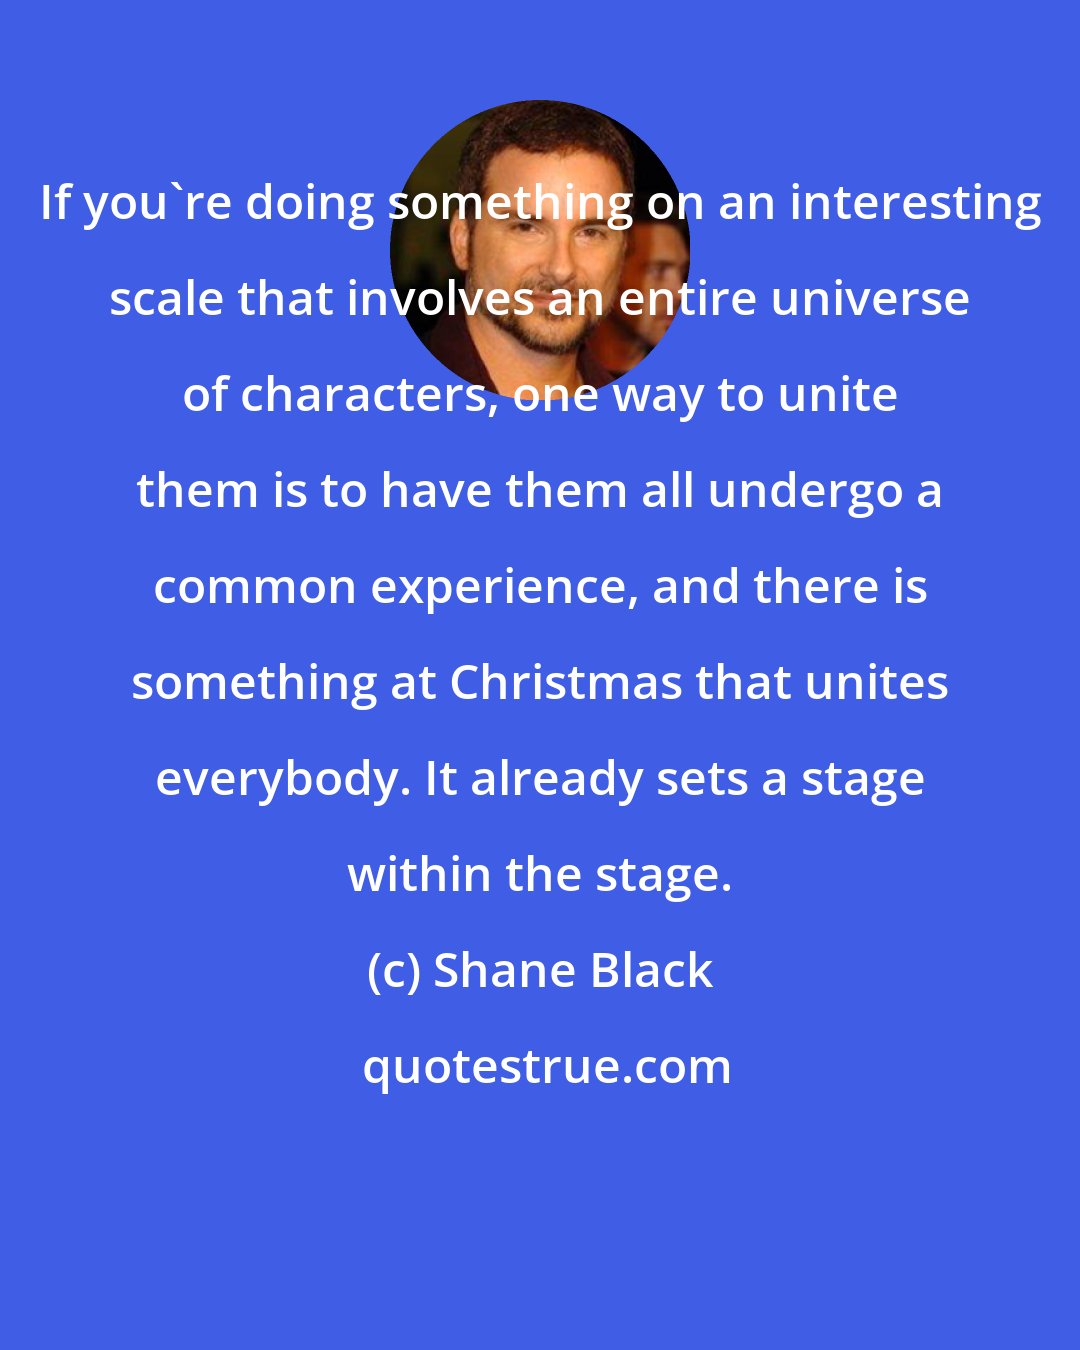 Shane Black: If you're doing something on an interesting scale that involves an entire universe of characters, one way to unite them is to have them all undergo a common experience, and there is something at Christmas that unites everybody. It already sets a stage within the stage.